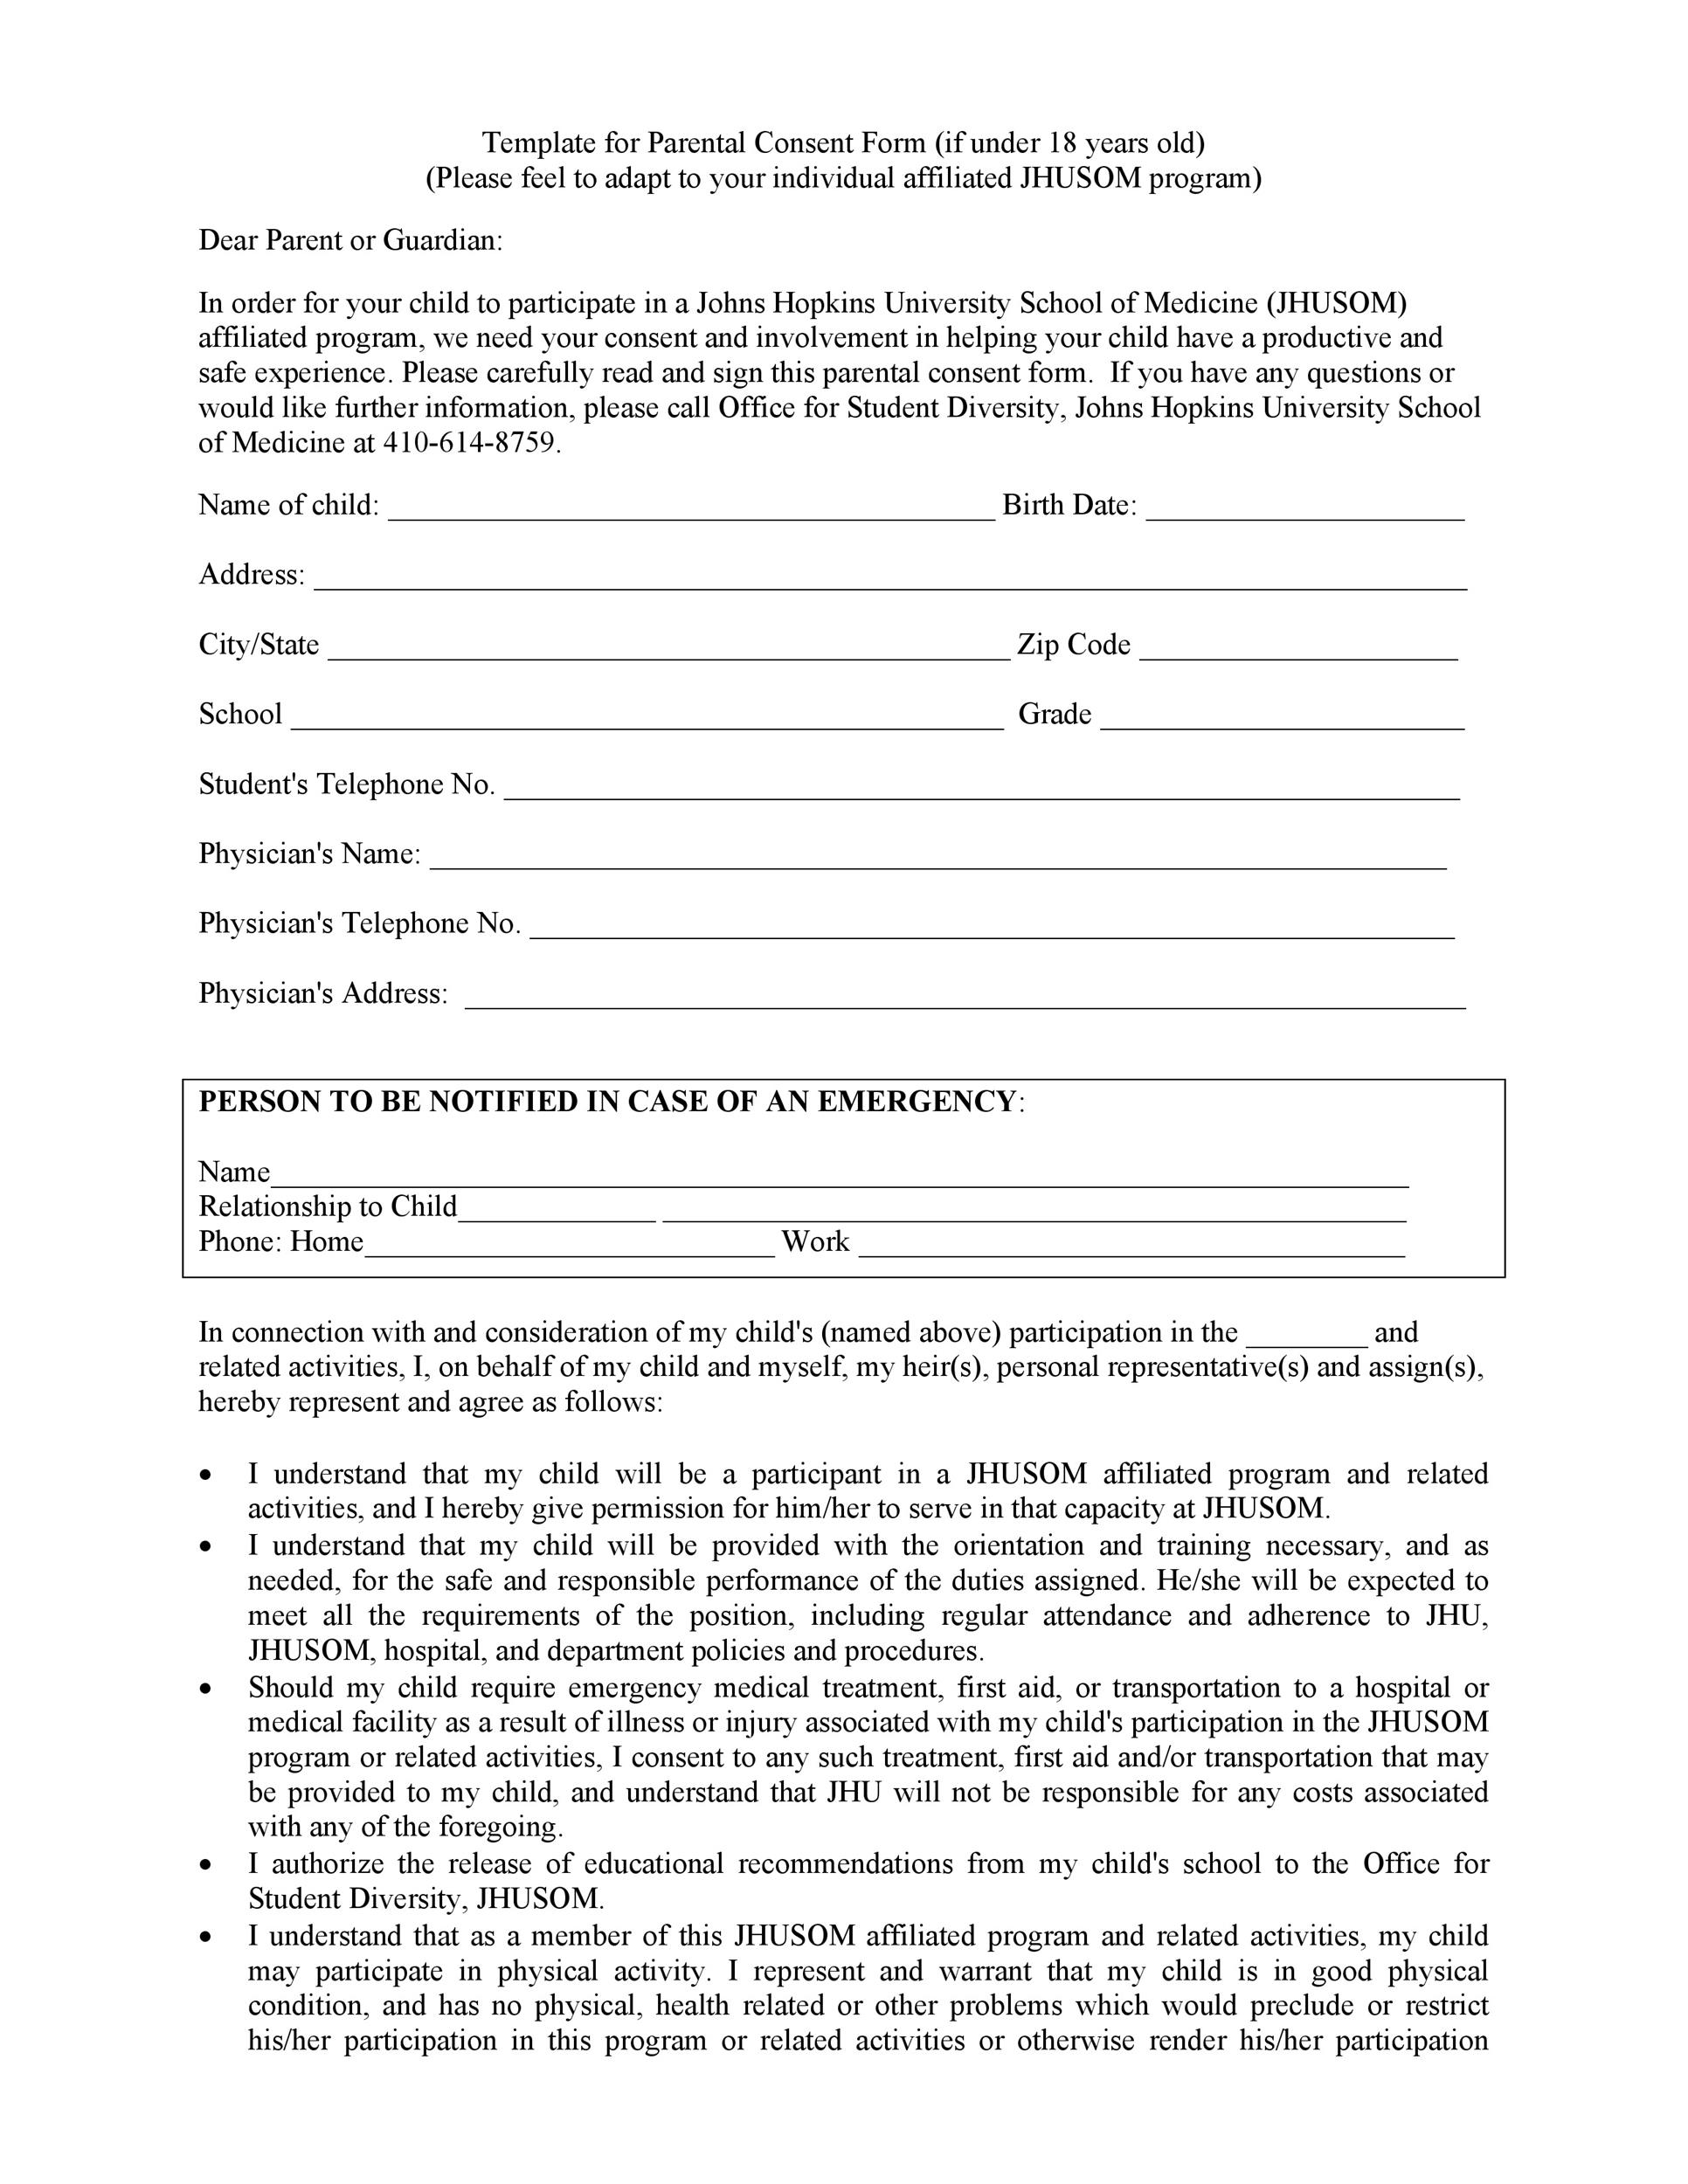 Free parental consent form template 39